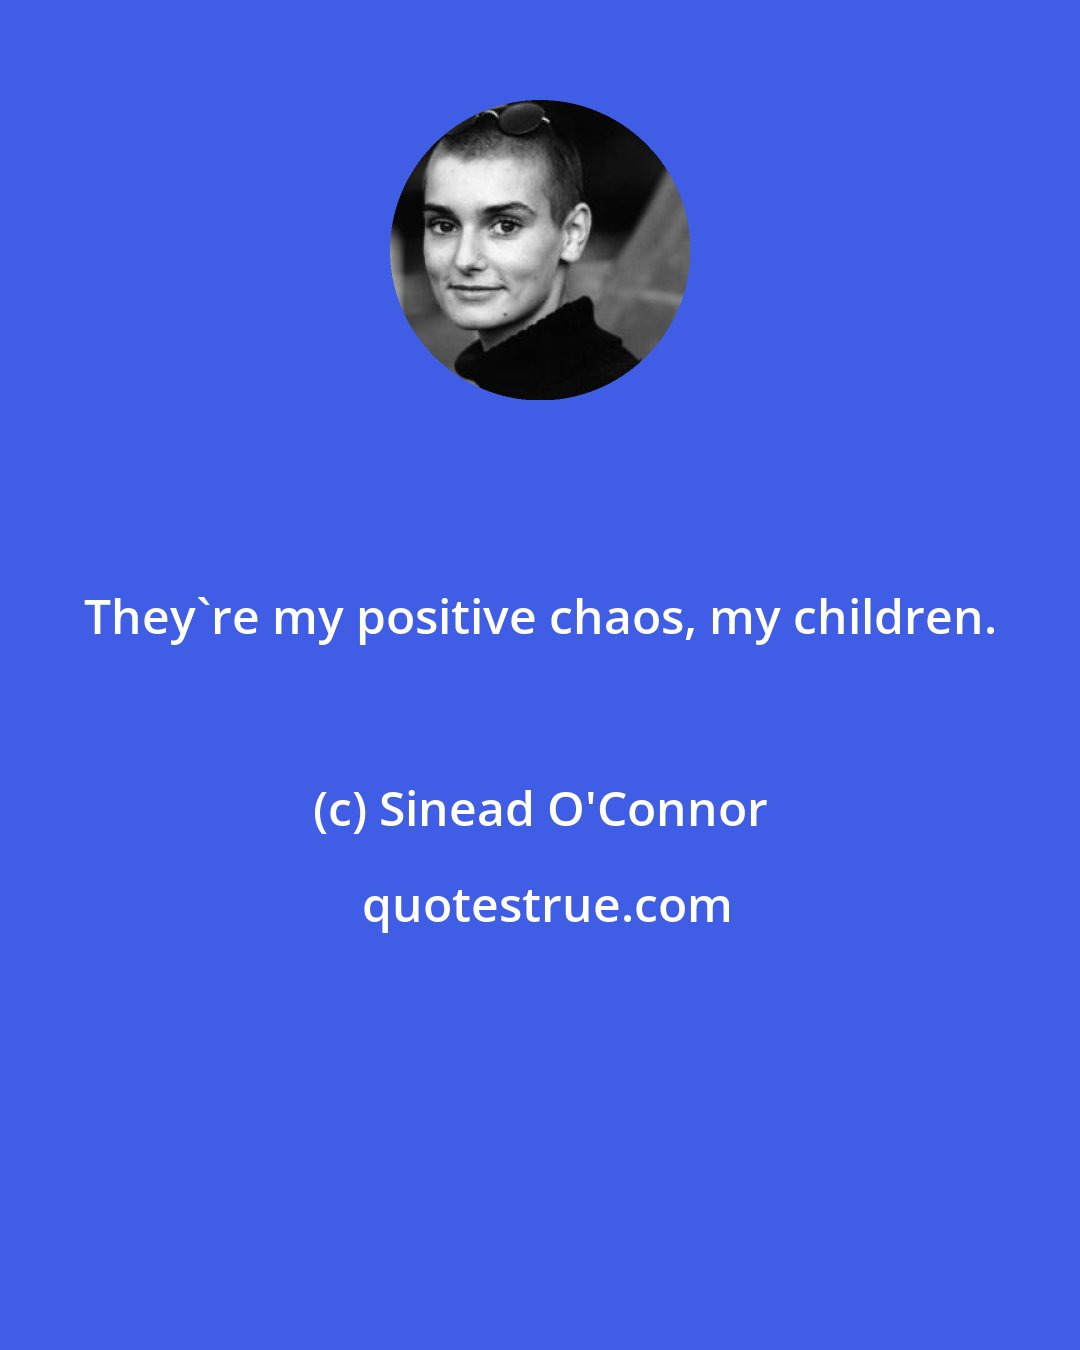 Sinead O'Connor: They're my positive chaos, my children.